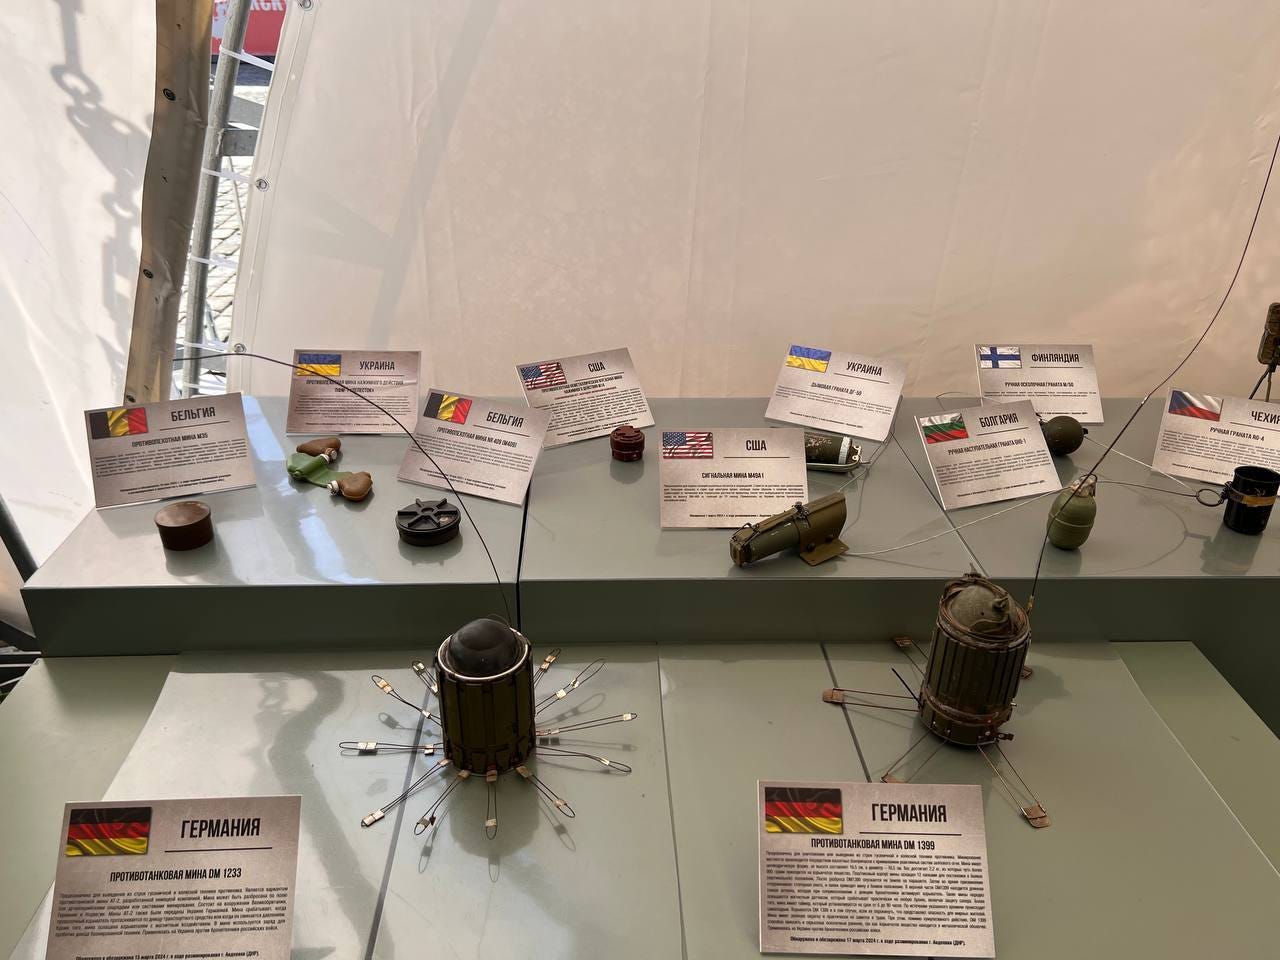 Mines and grenades from various NATO countries on display.